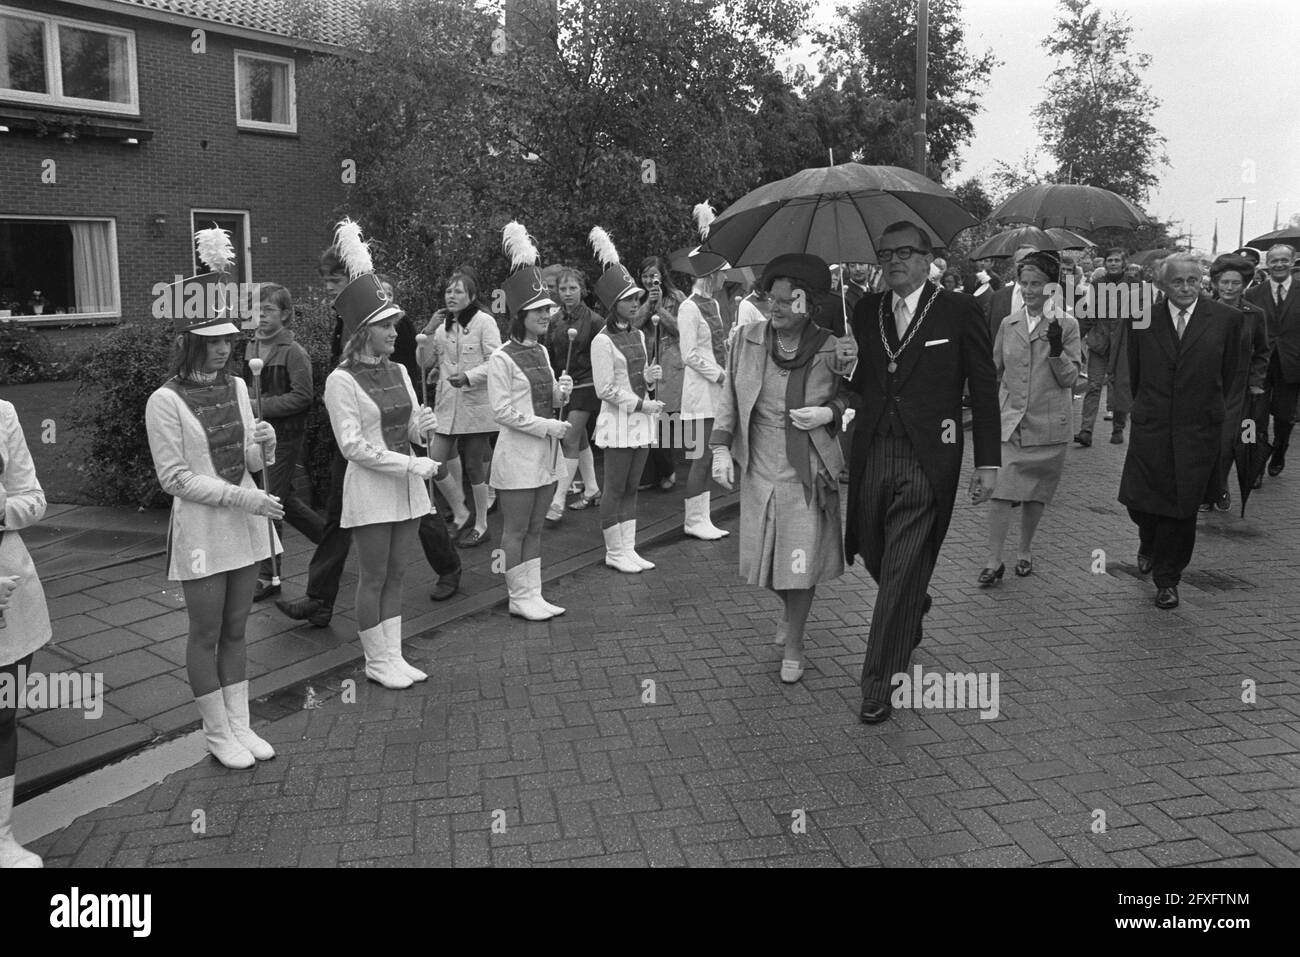 Queen Juliana visits the municipalities of Rhoon, Poortugaal and Maassluis ( South Holland ), Queen Juliana and Mayor Bos of Rhoon walk past majorettes, September 24, 1971, mayors, queens, majorettes, umbrellas, The Netherlands, 20th century press agency photo, news to remember, documentary, historic photography 1945-1990, visual stories, human history of the Twentieth Century, capturing moments in time Stock Photo